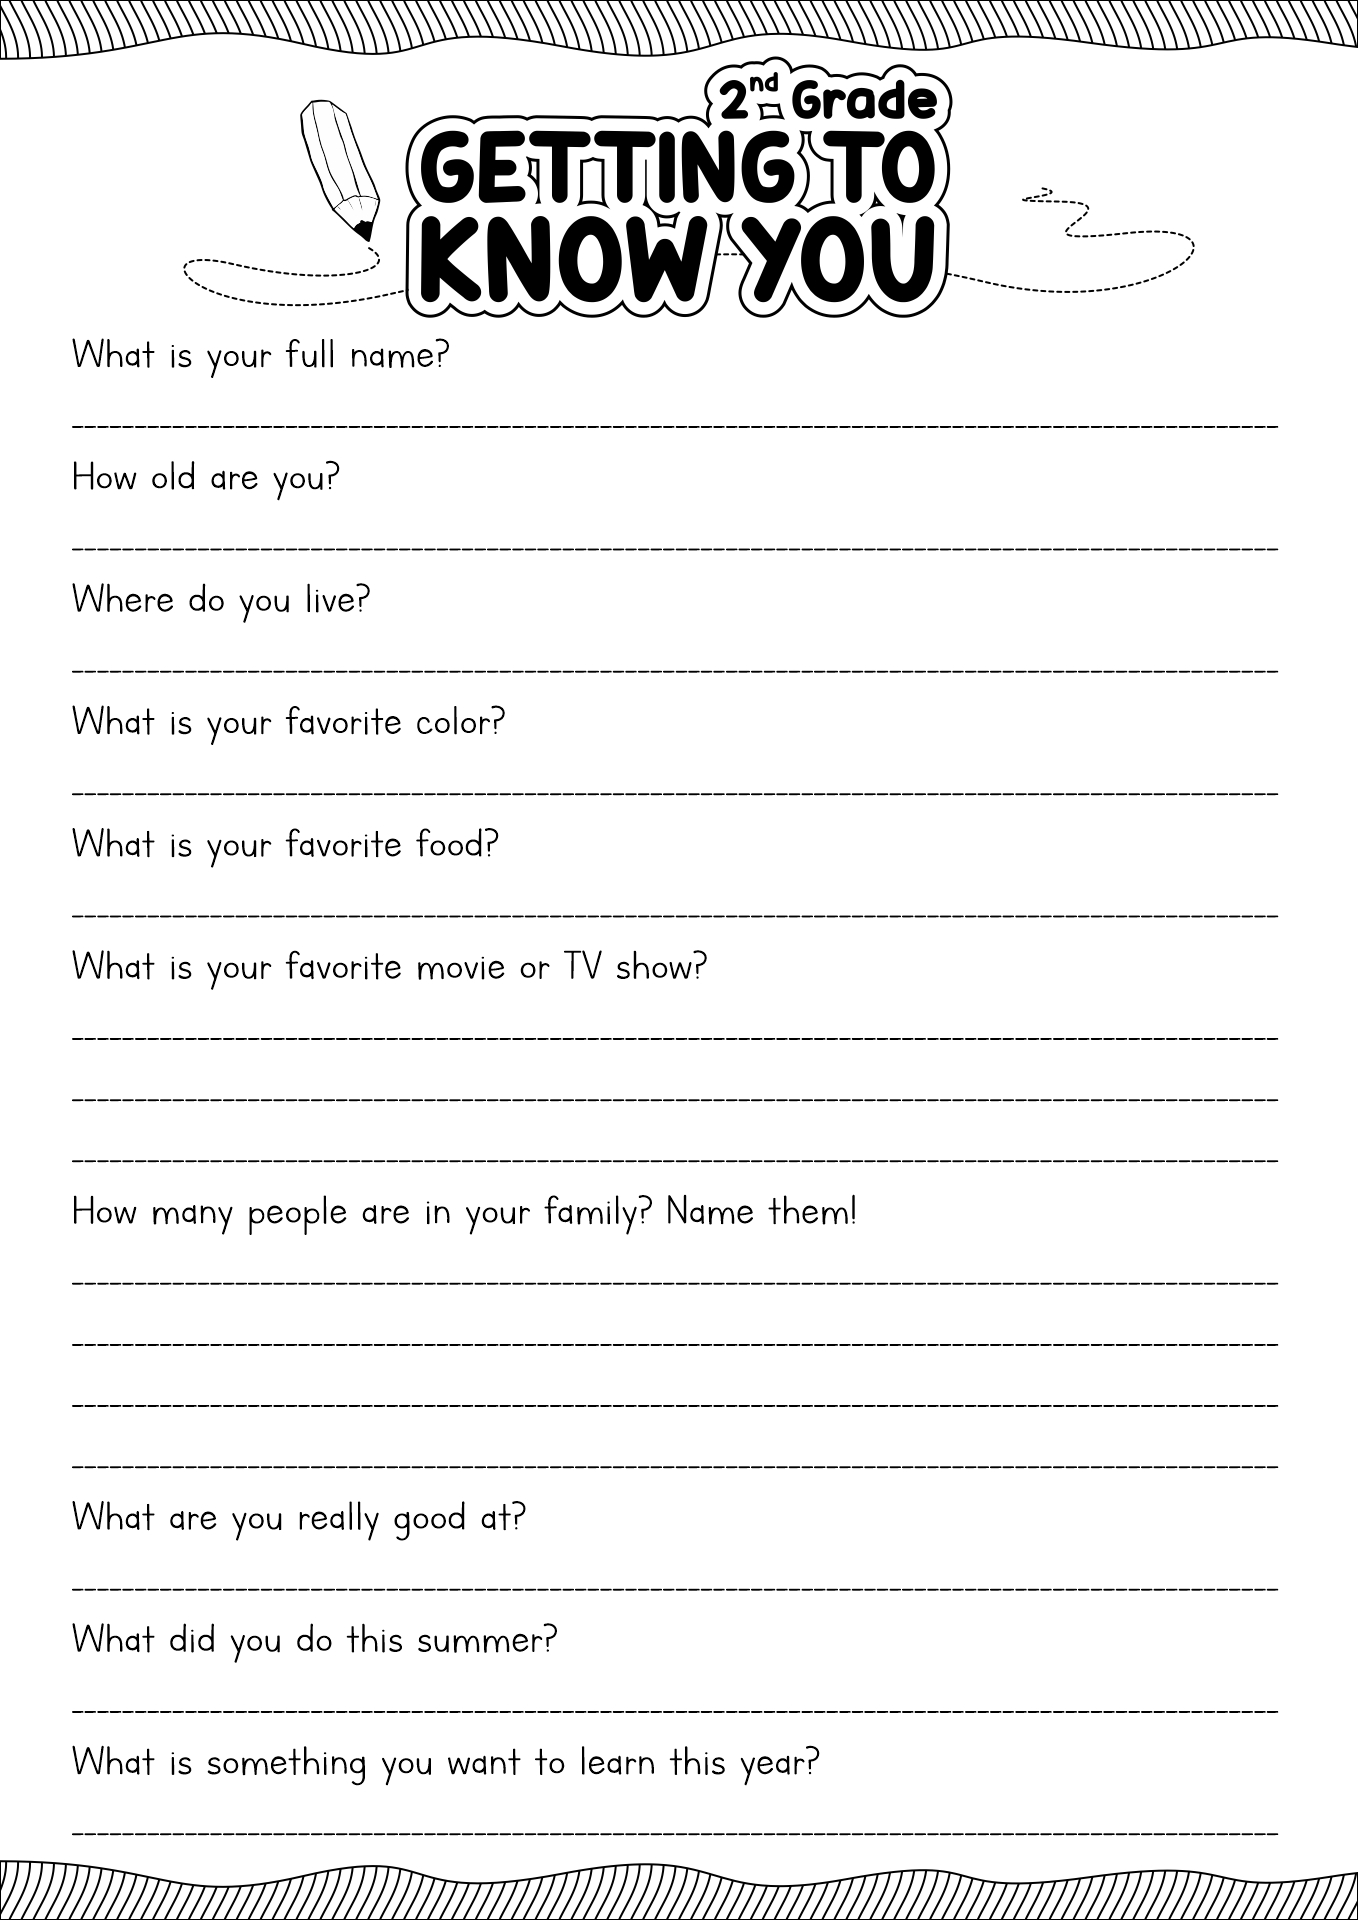 Free Printable Get To Know You Worksheet